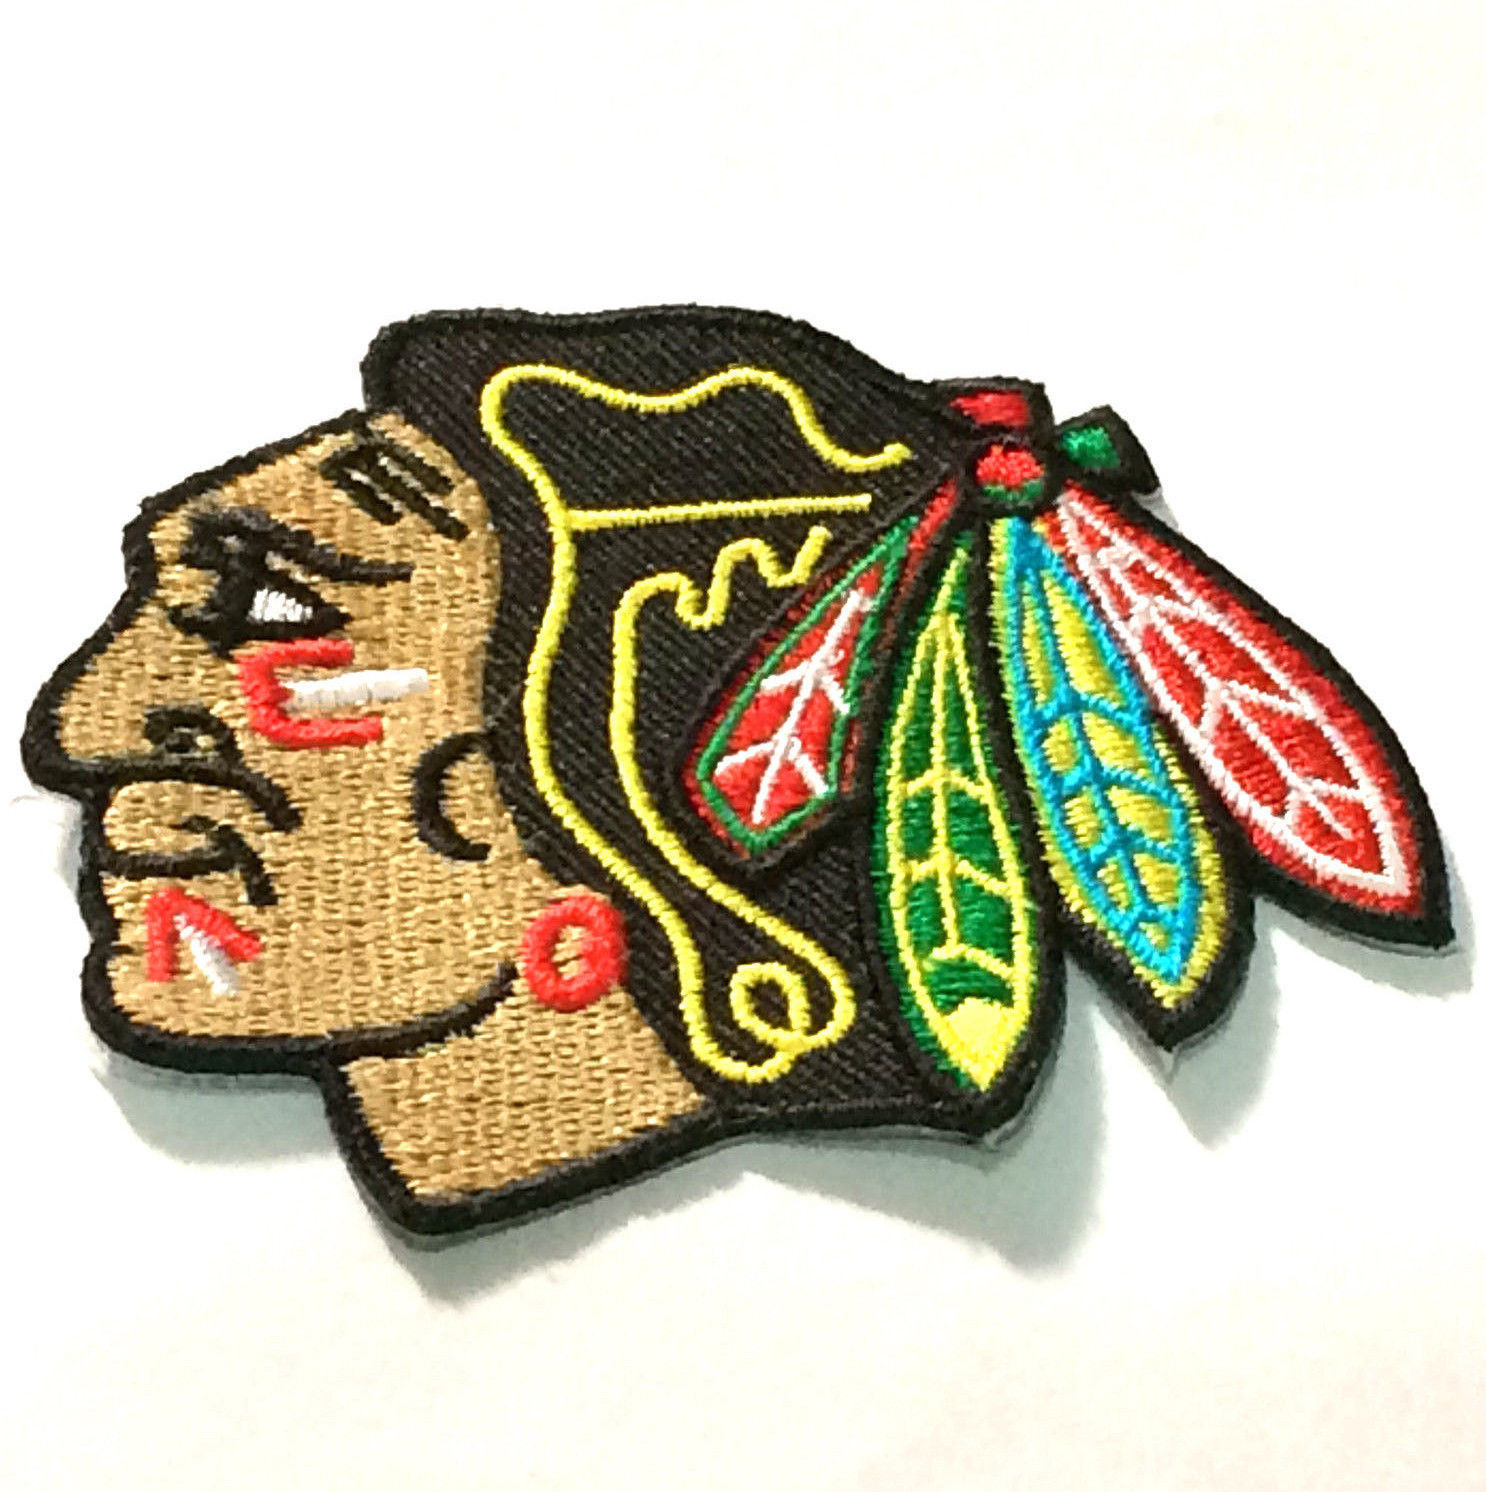 nhl logo patches